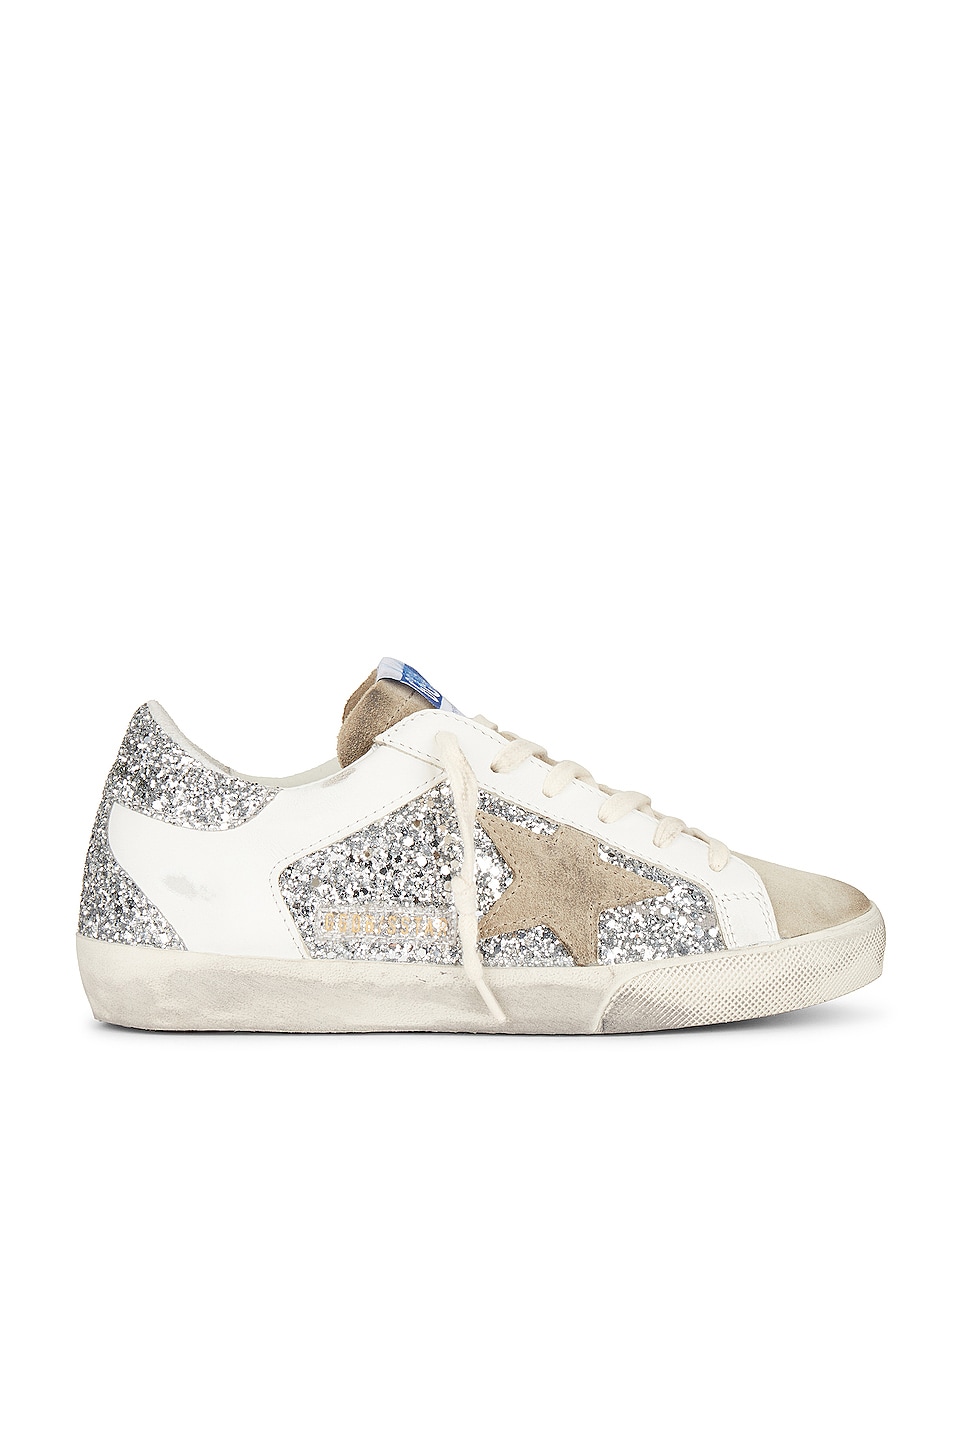 Image 1 of Super-Star Sneaker in Silver, White, & Taupe